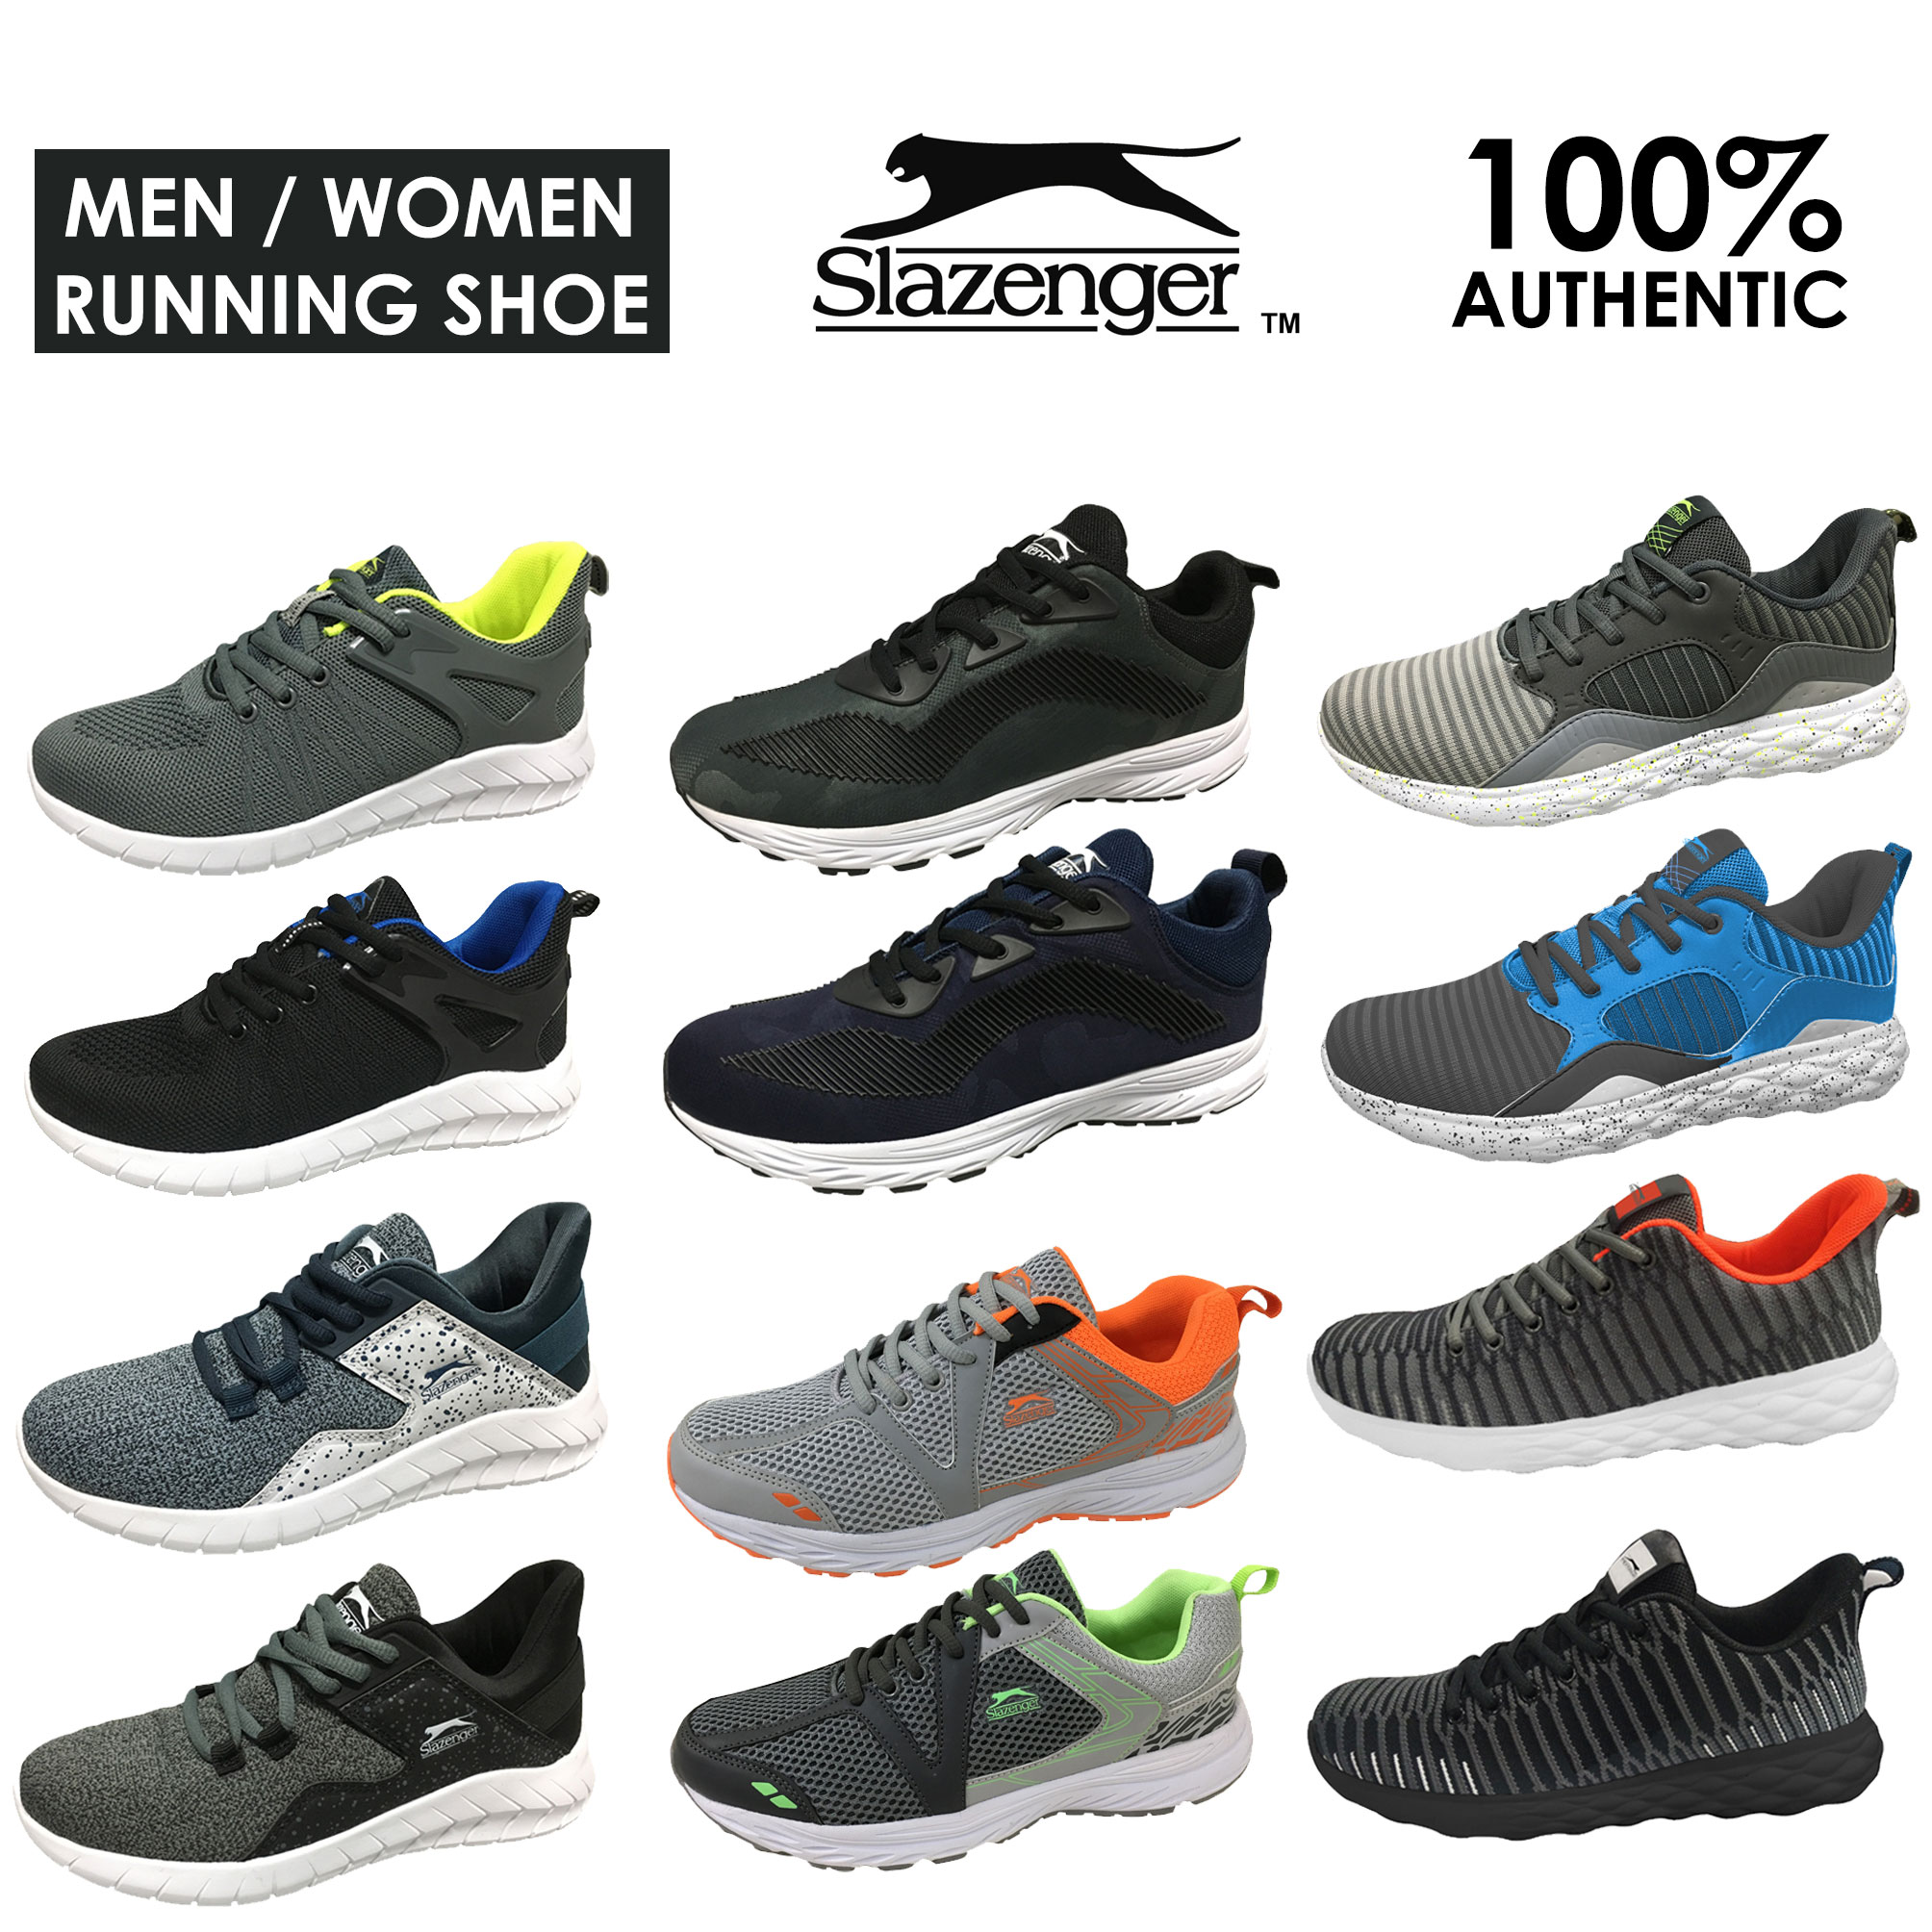 RUNNING CASUAL TRAINING SPORTS SHOES 